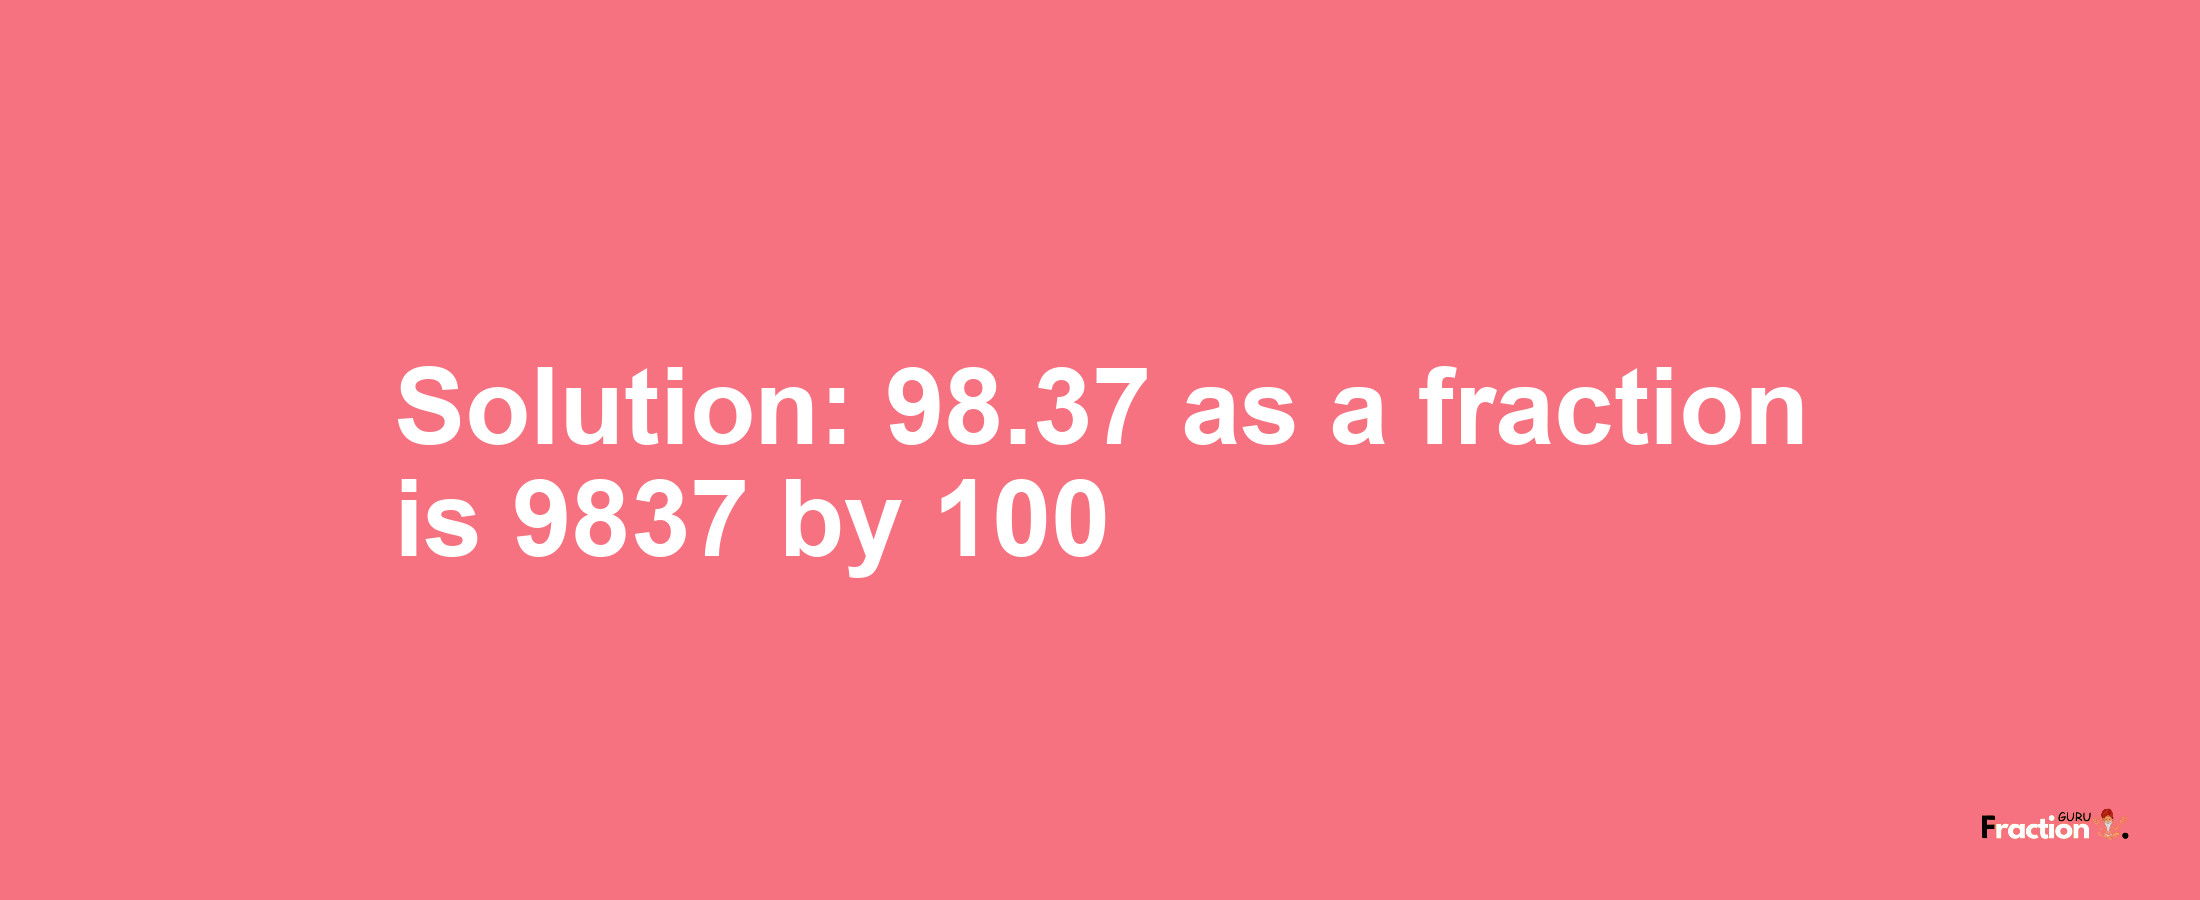 Solution:98.37 as a fraction is 9837/100